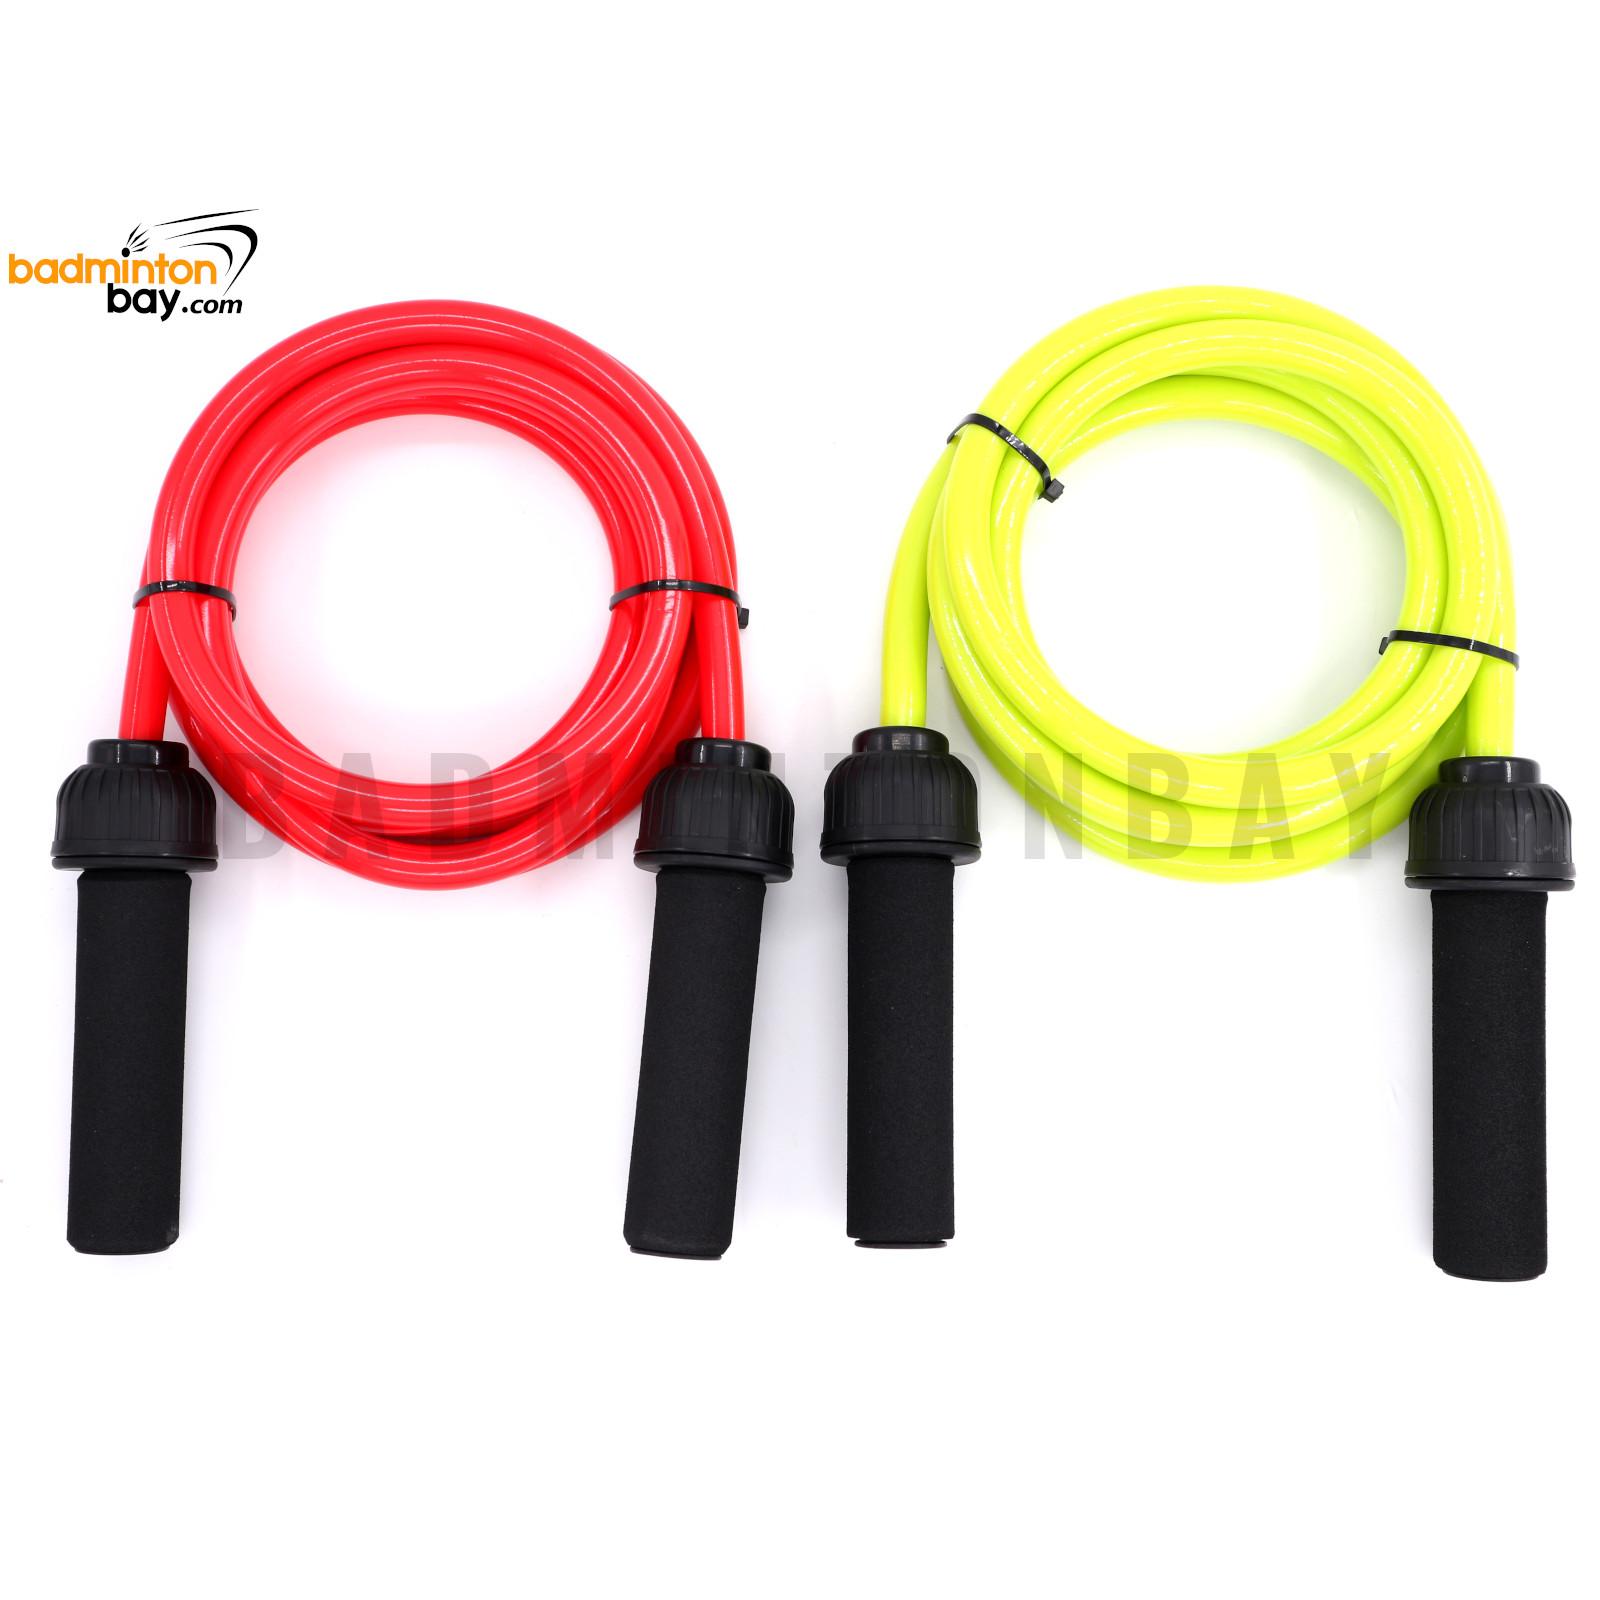 Crossfit Heavy Skipping Rope 700g Weighted Foam Handle Bold PVC